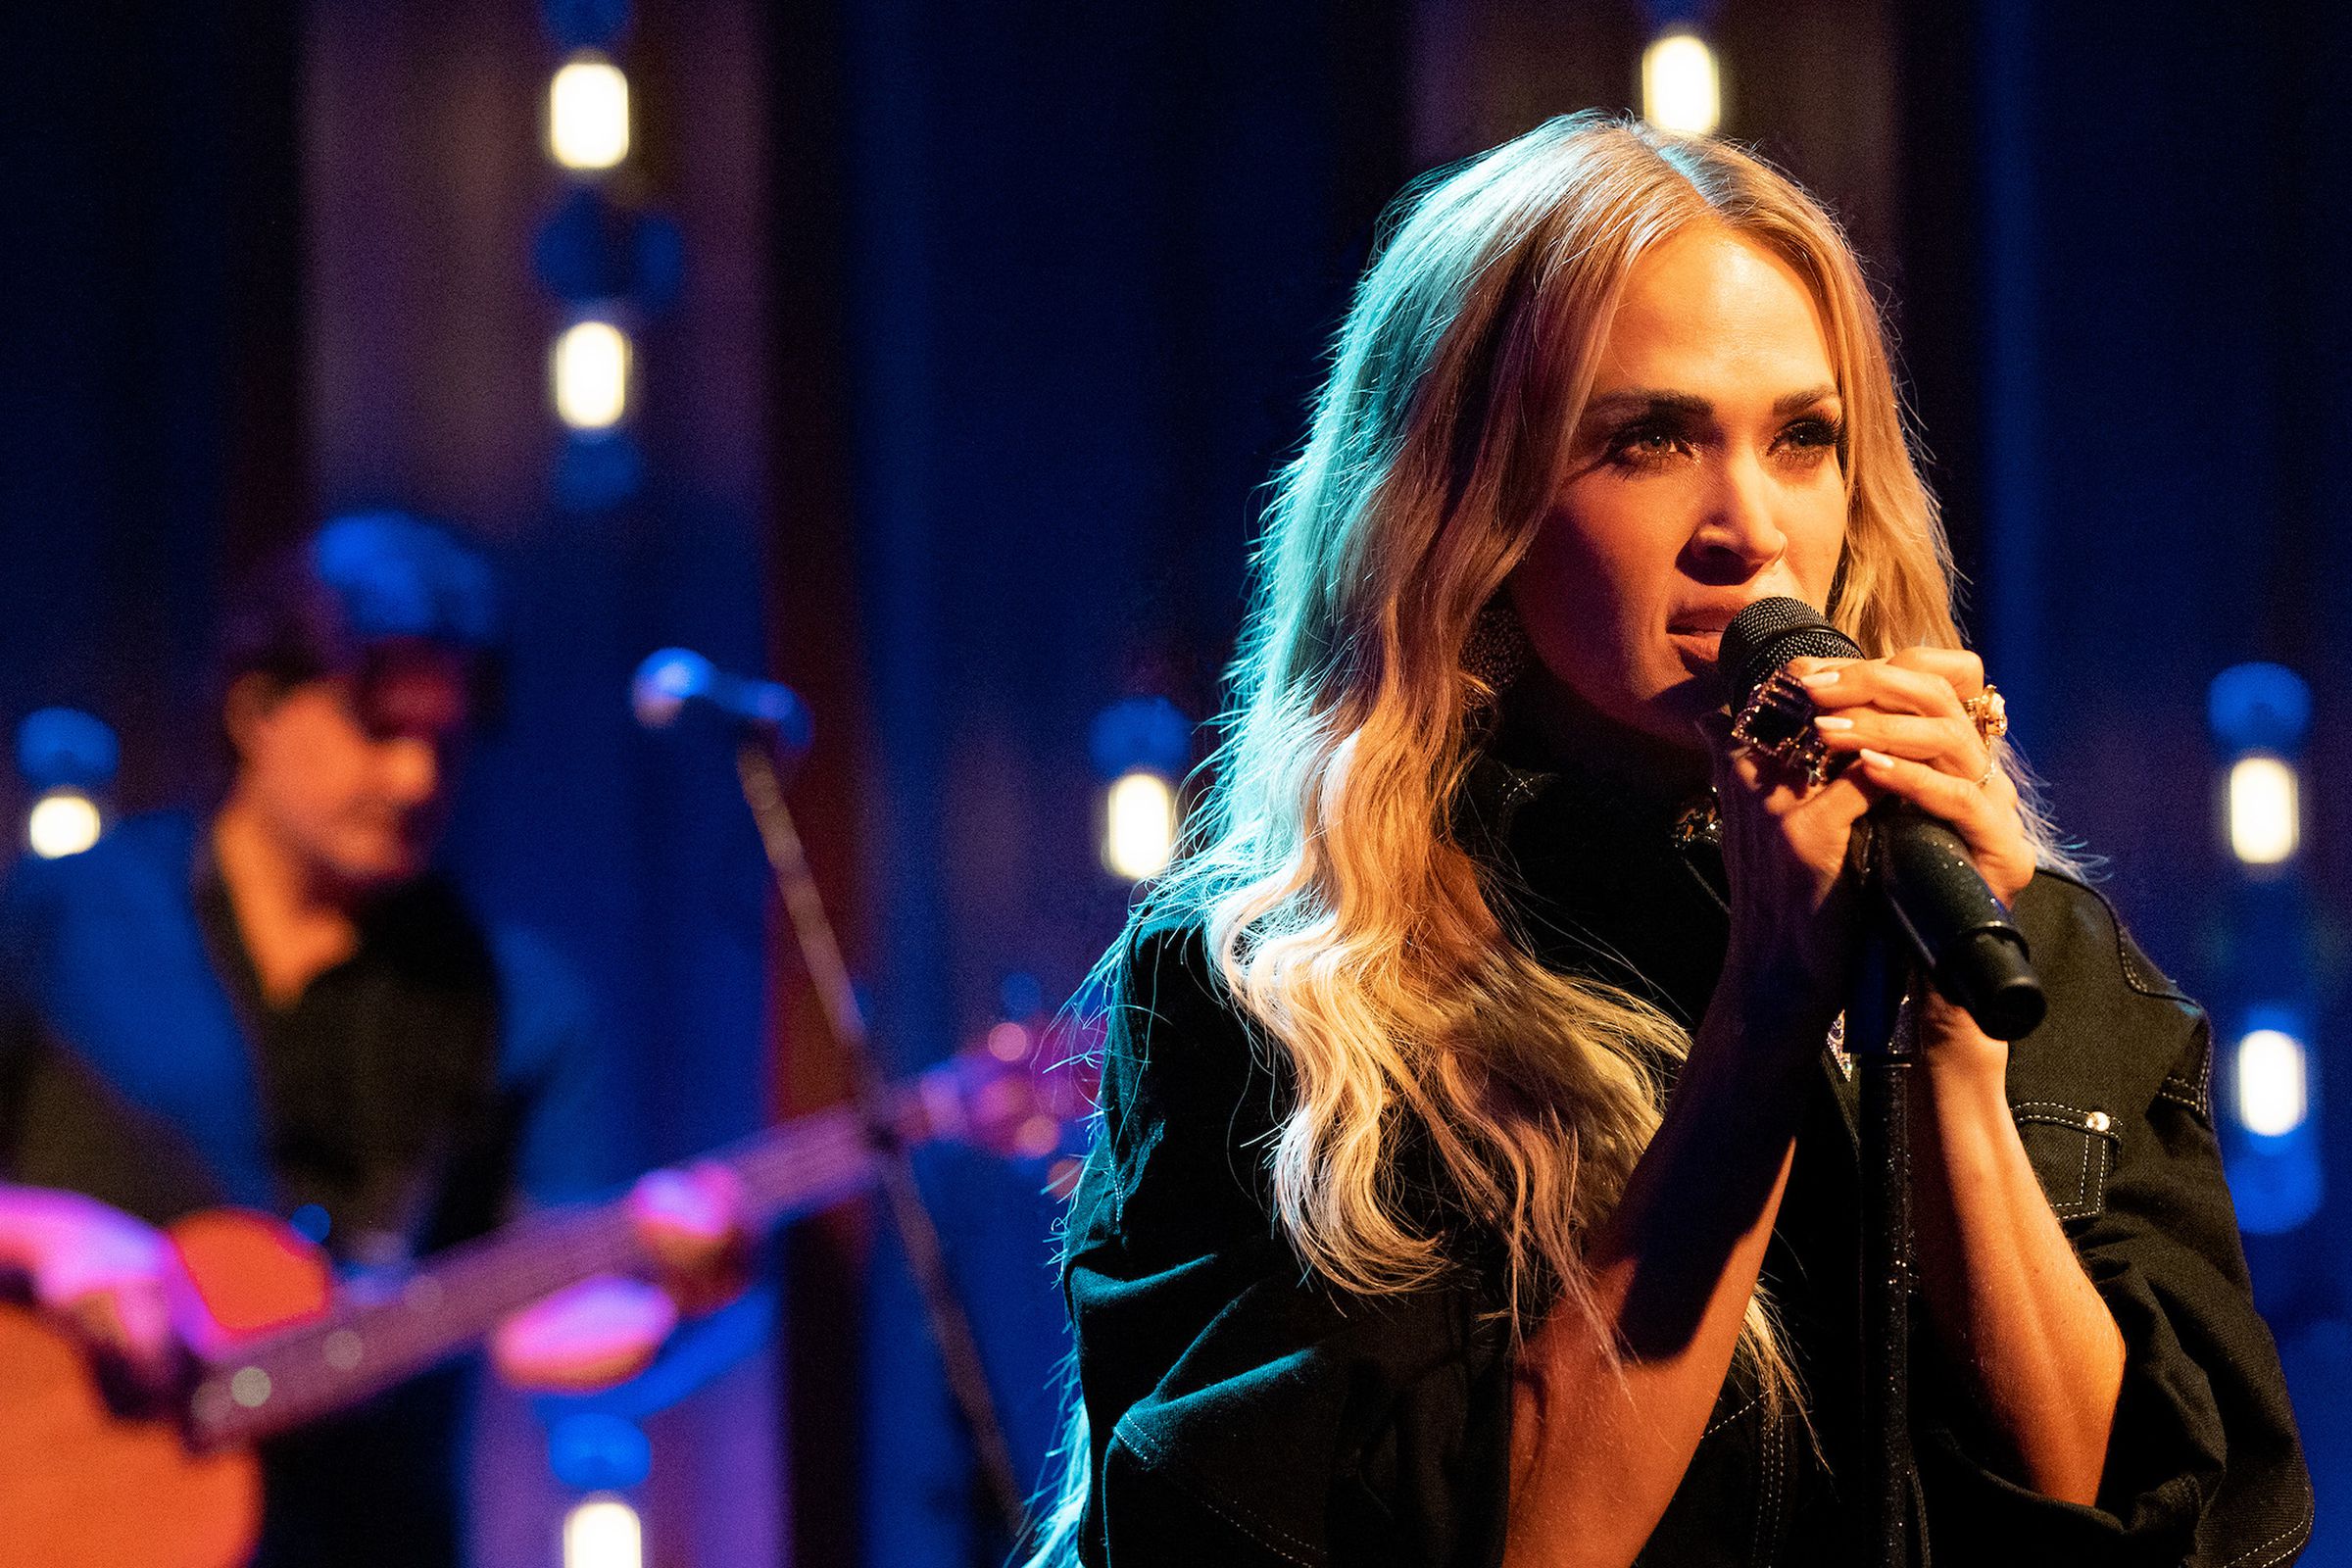 Carrie Underwood’s Apple Music Sessions performance is available now.